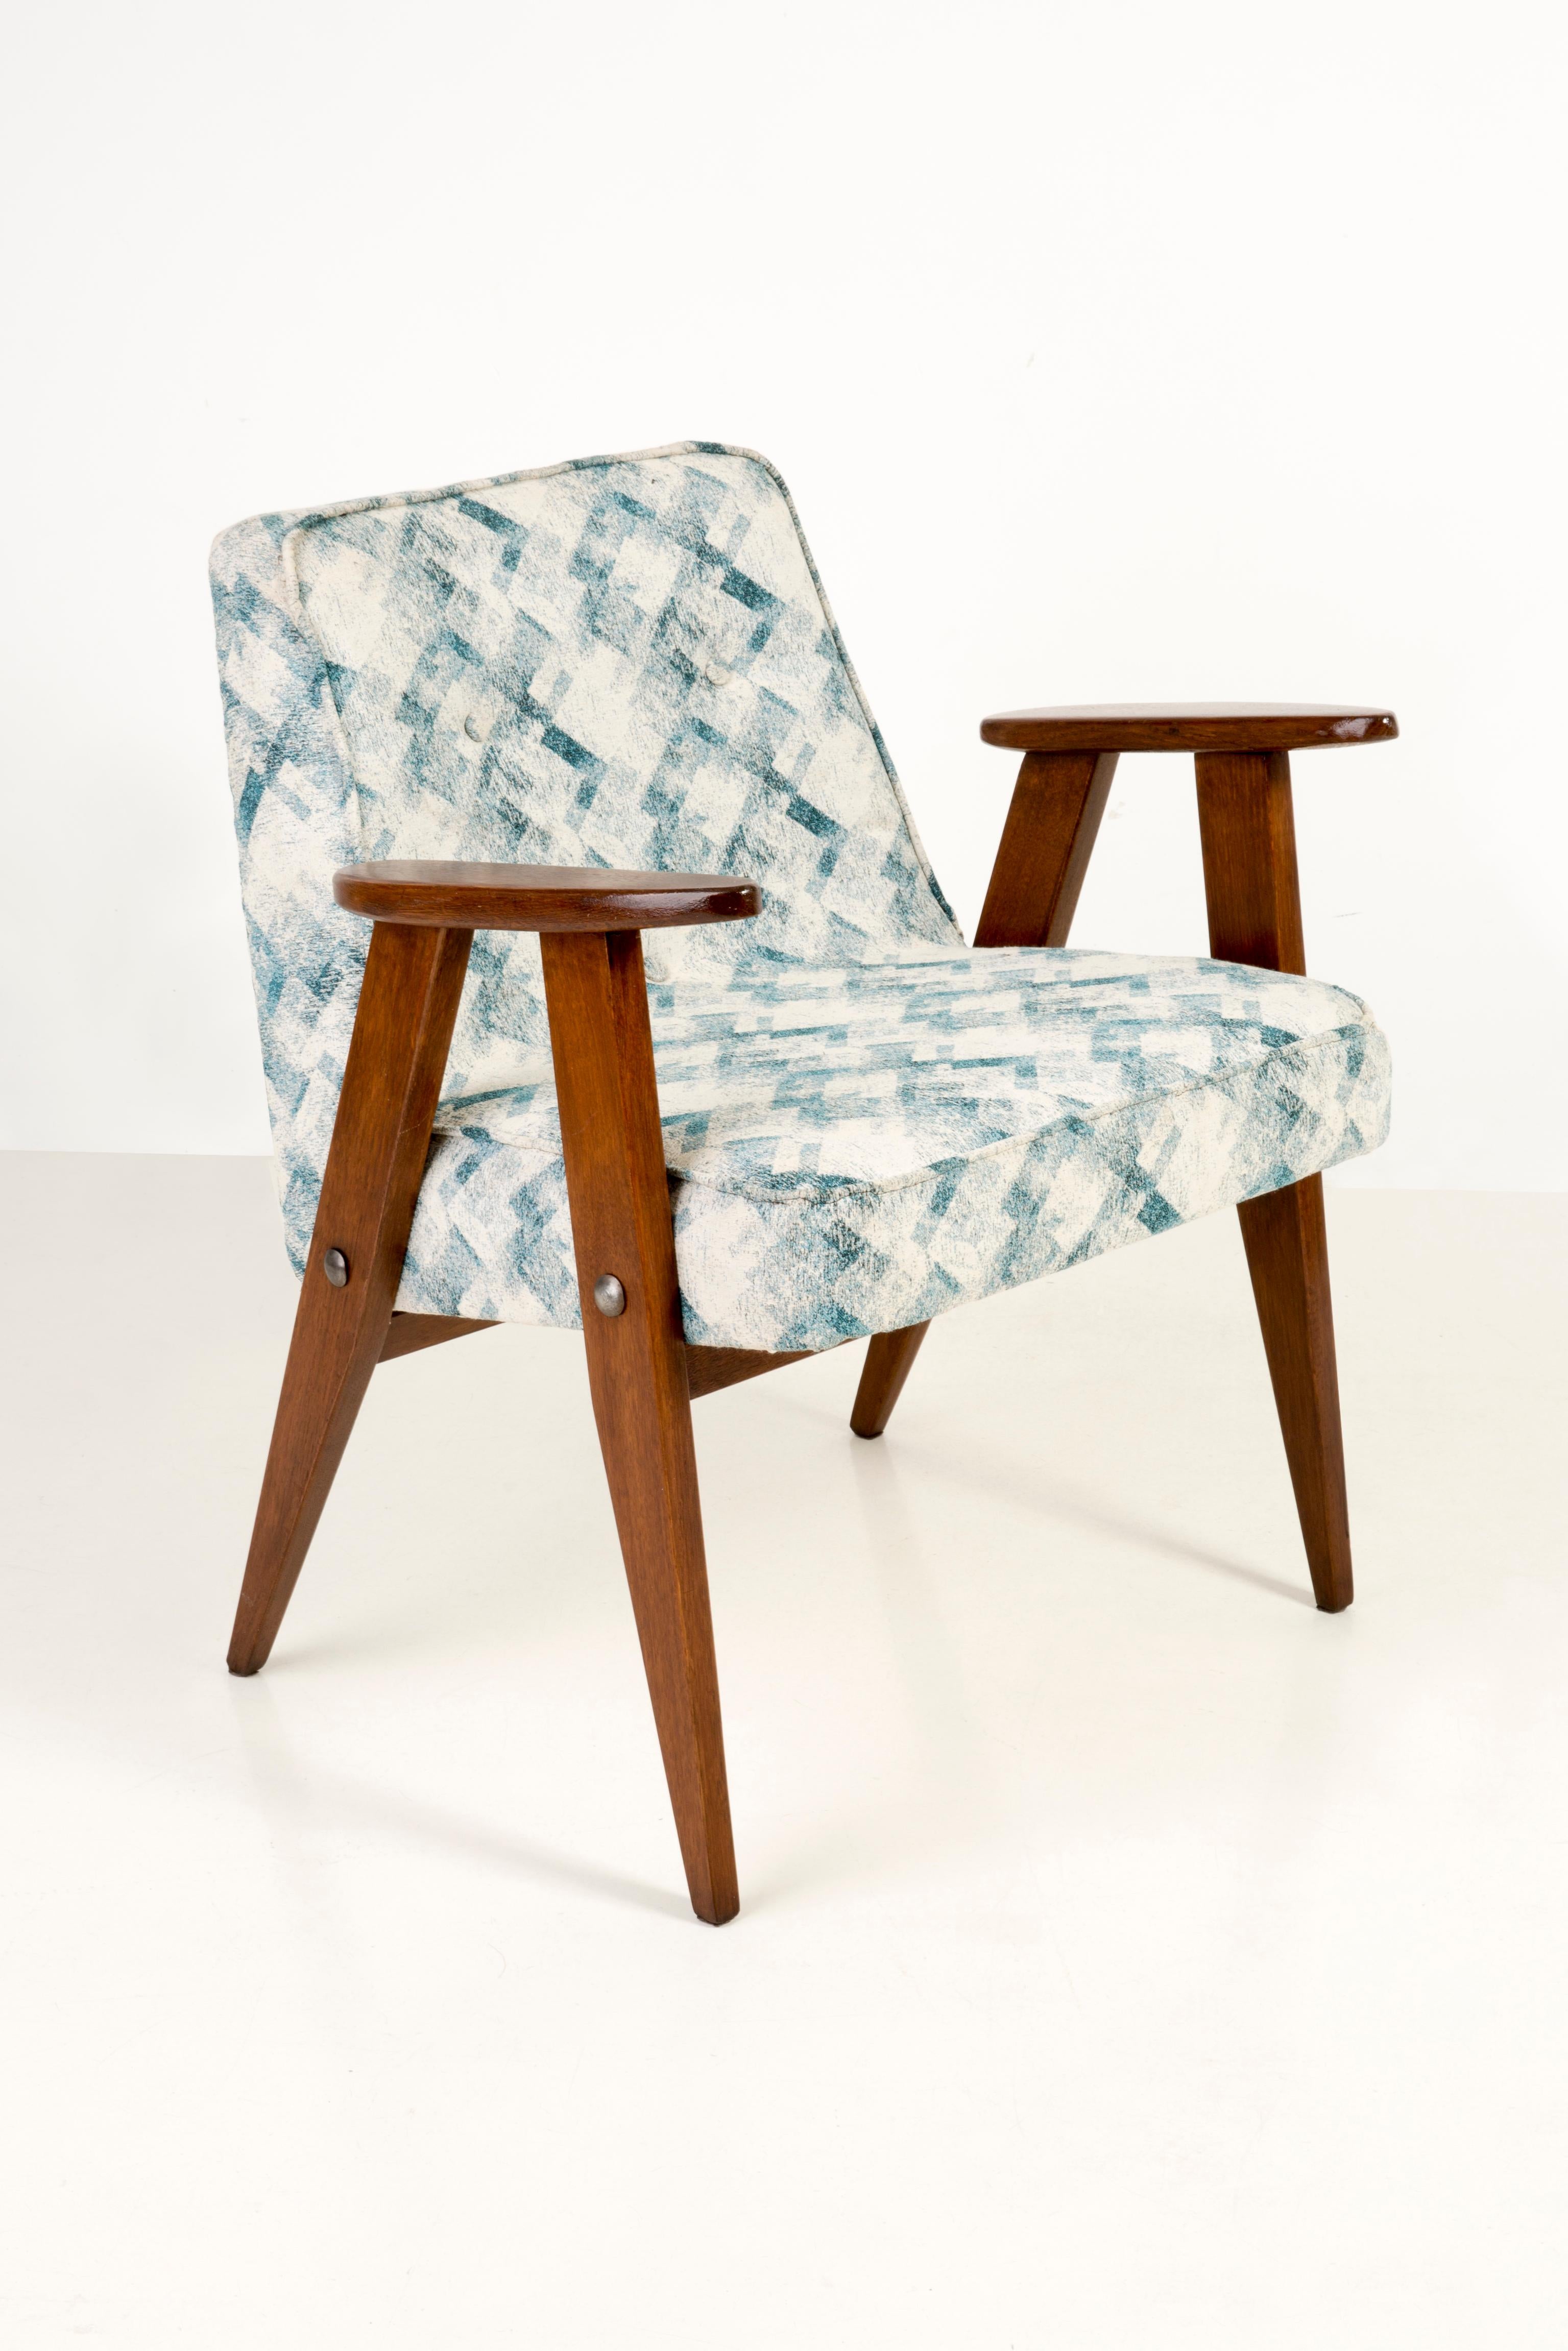 Hand-Crafted Set of Two-Light Green Pattern 366 Armchair, Jozef Chierowski, 1960s For Sale